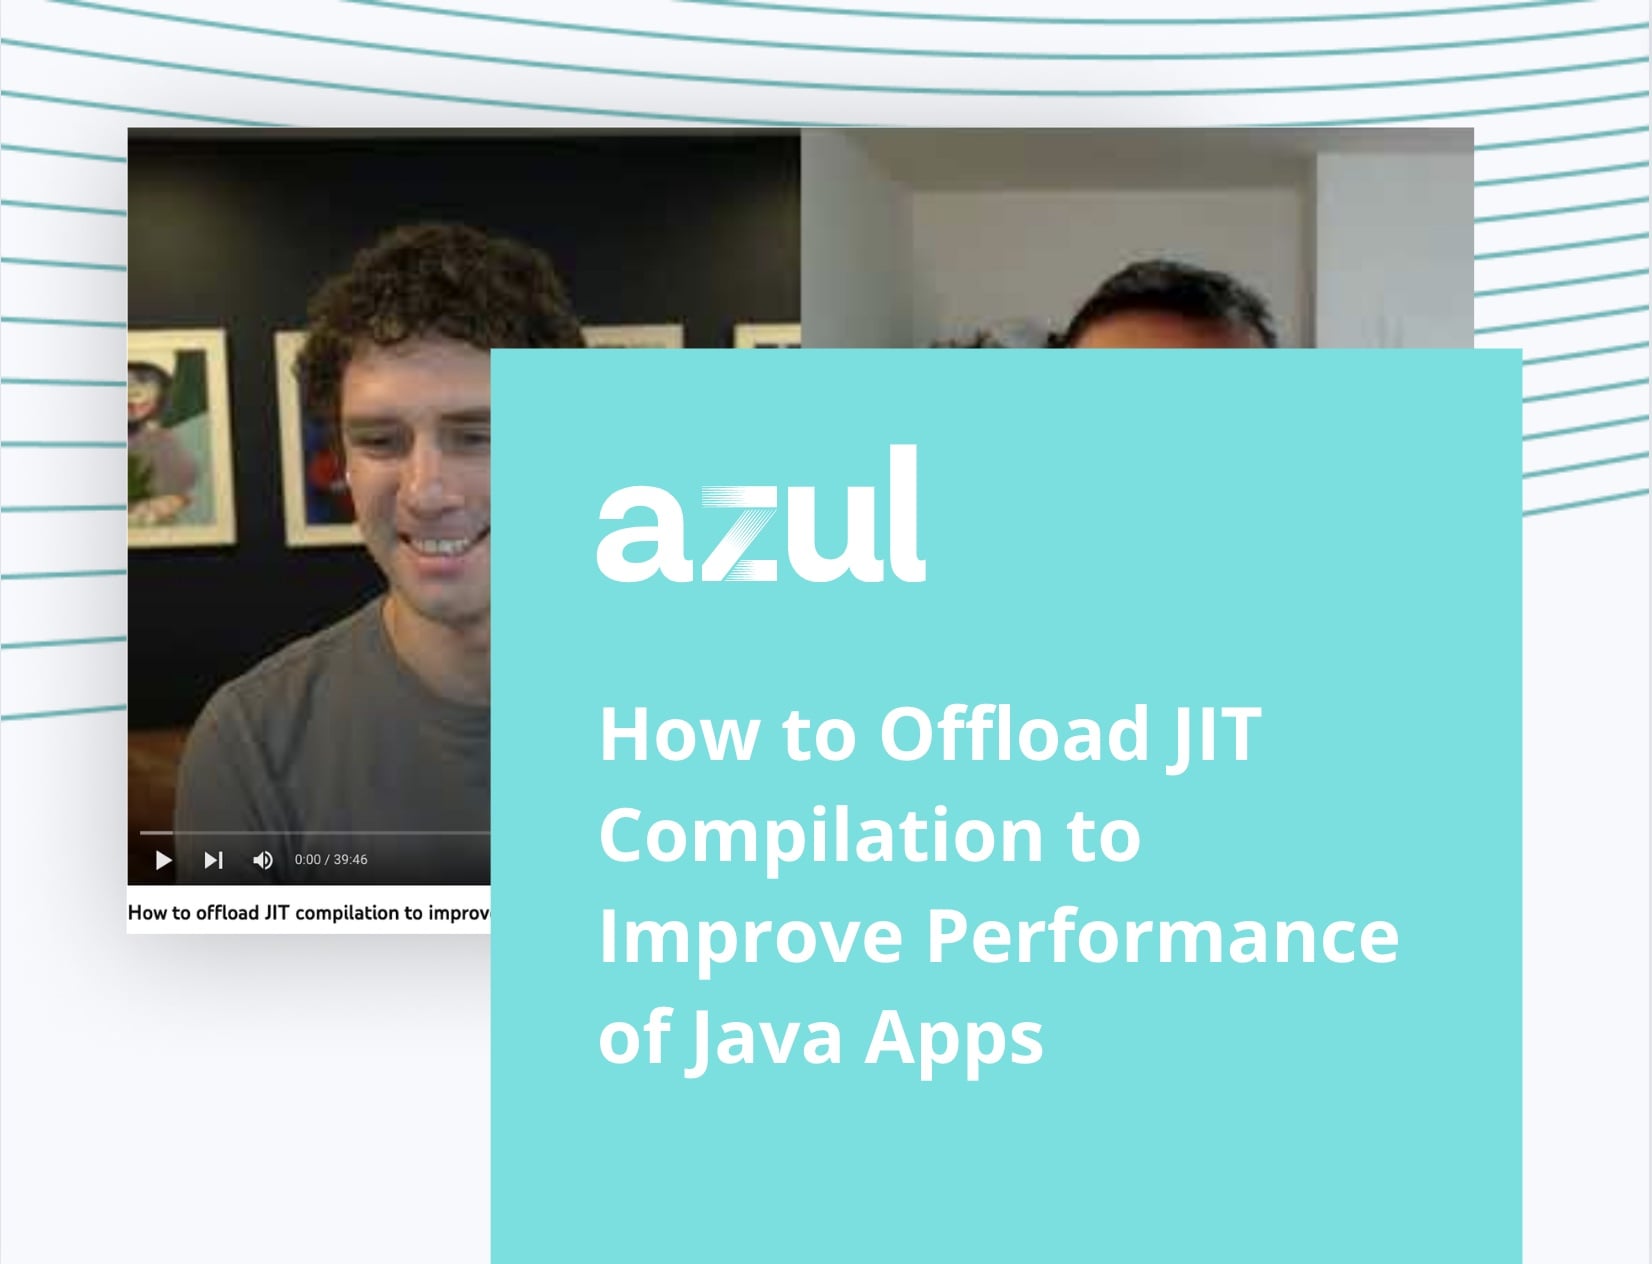 How to Offload JIT Compilation to Improve Performance of Java Apps